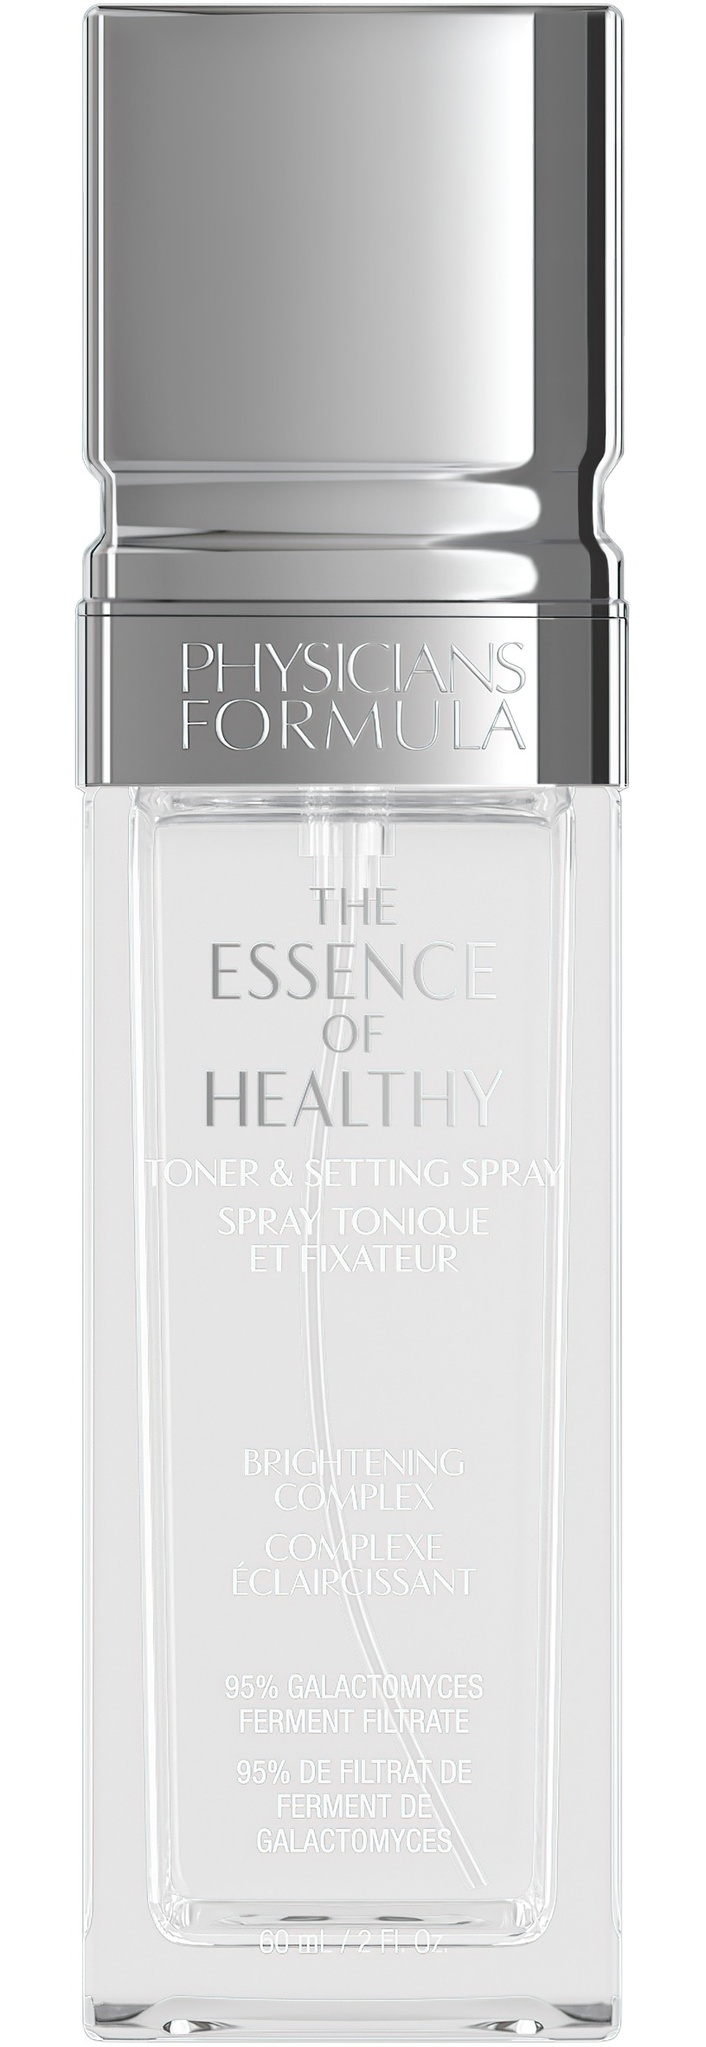 Physicians Formula The Essence Of Healthy Toner & Setting Spray